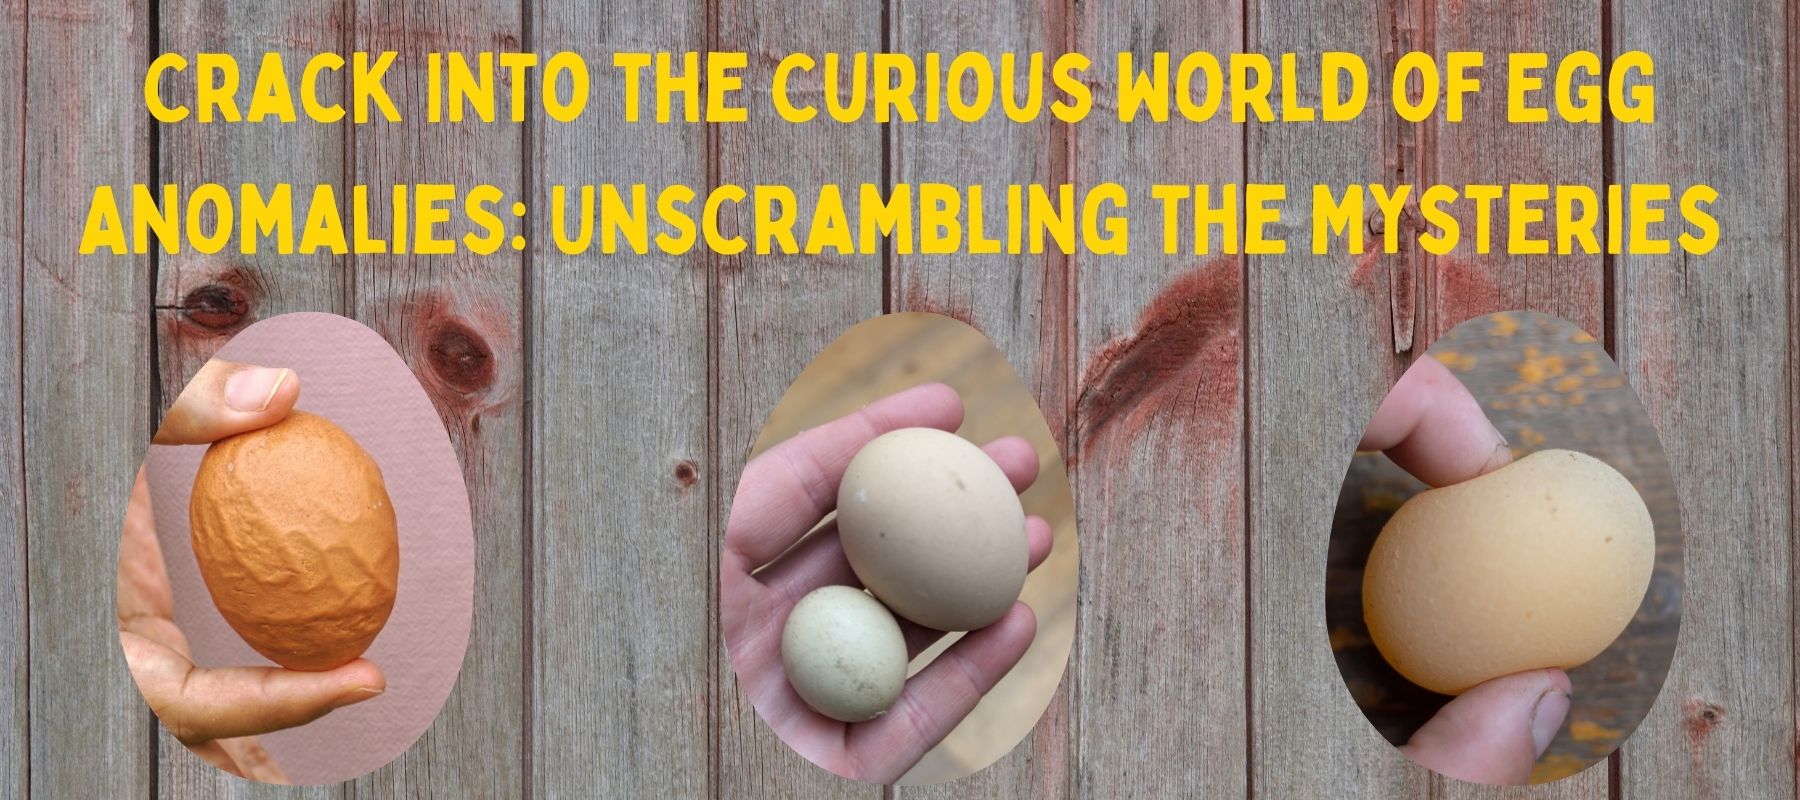 Crack Into the Curious World of Egg Anomalies: Unscrambling the Mysteries